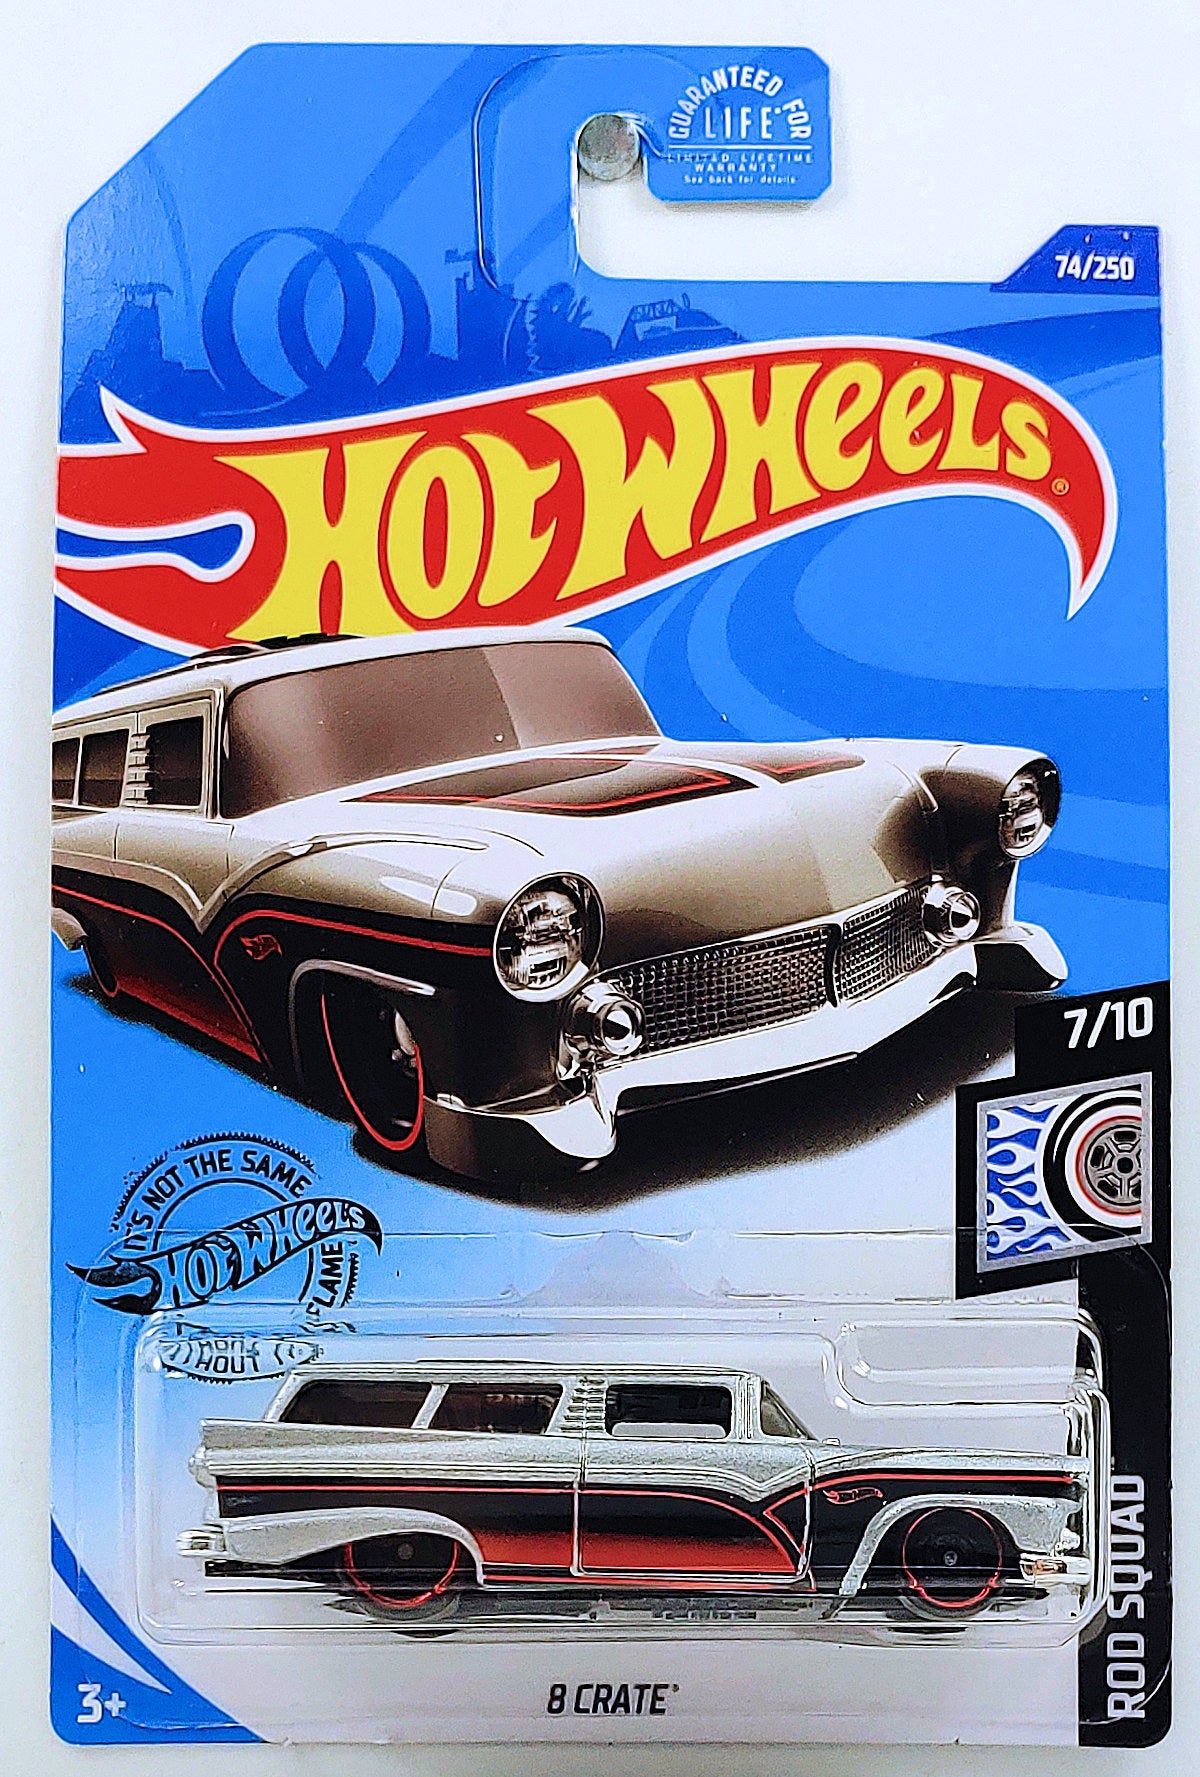 Hot Wheels 2020 - Collector # 074/250 - 8 CRATE '50s Ford Wagon